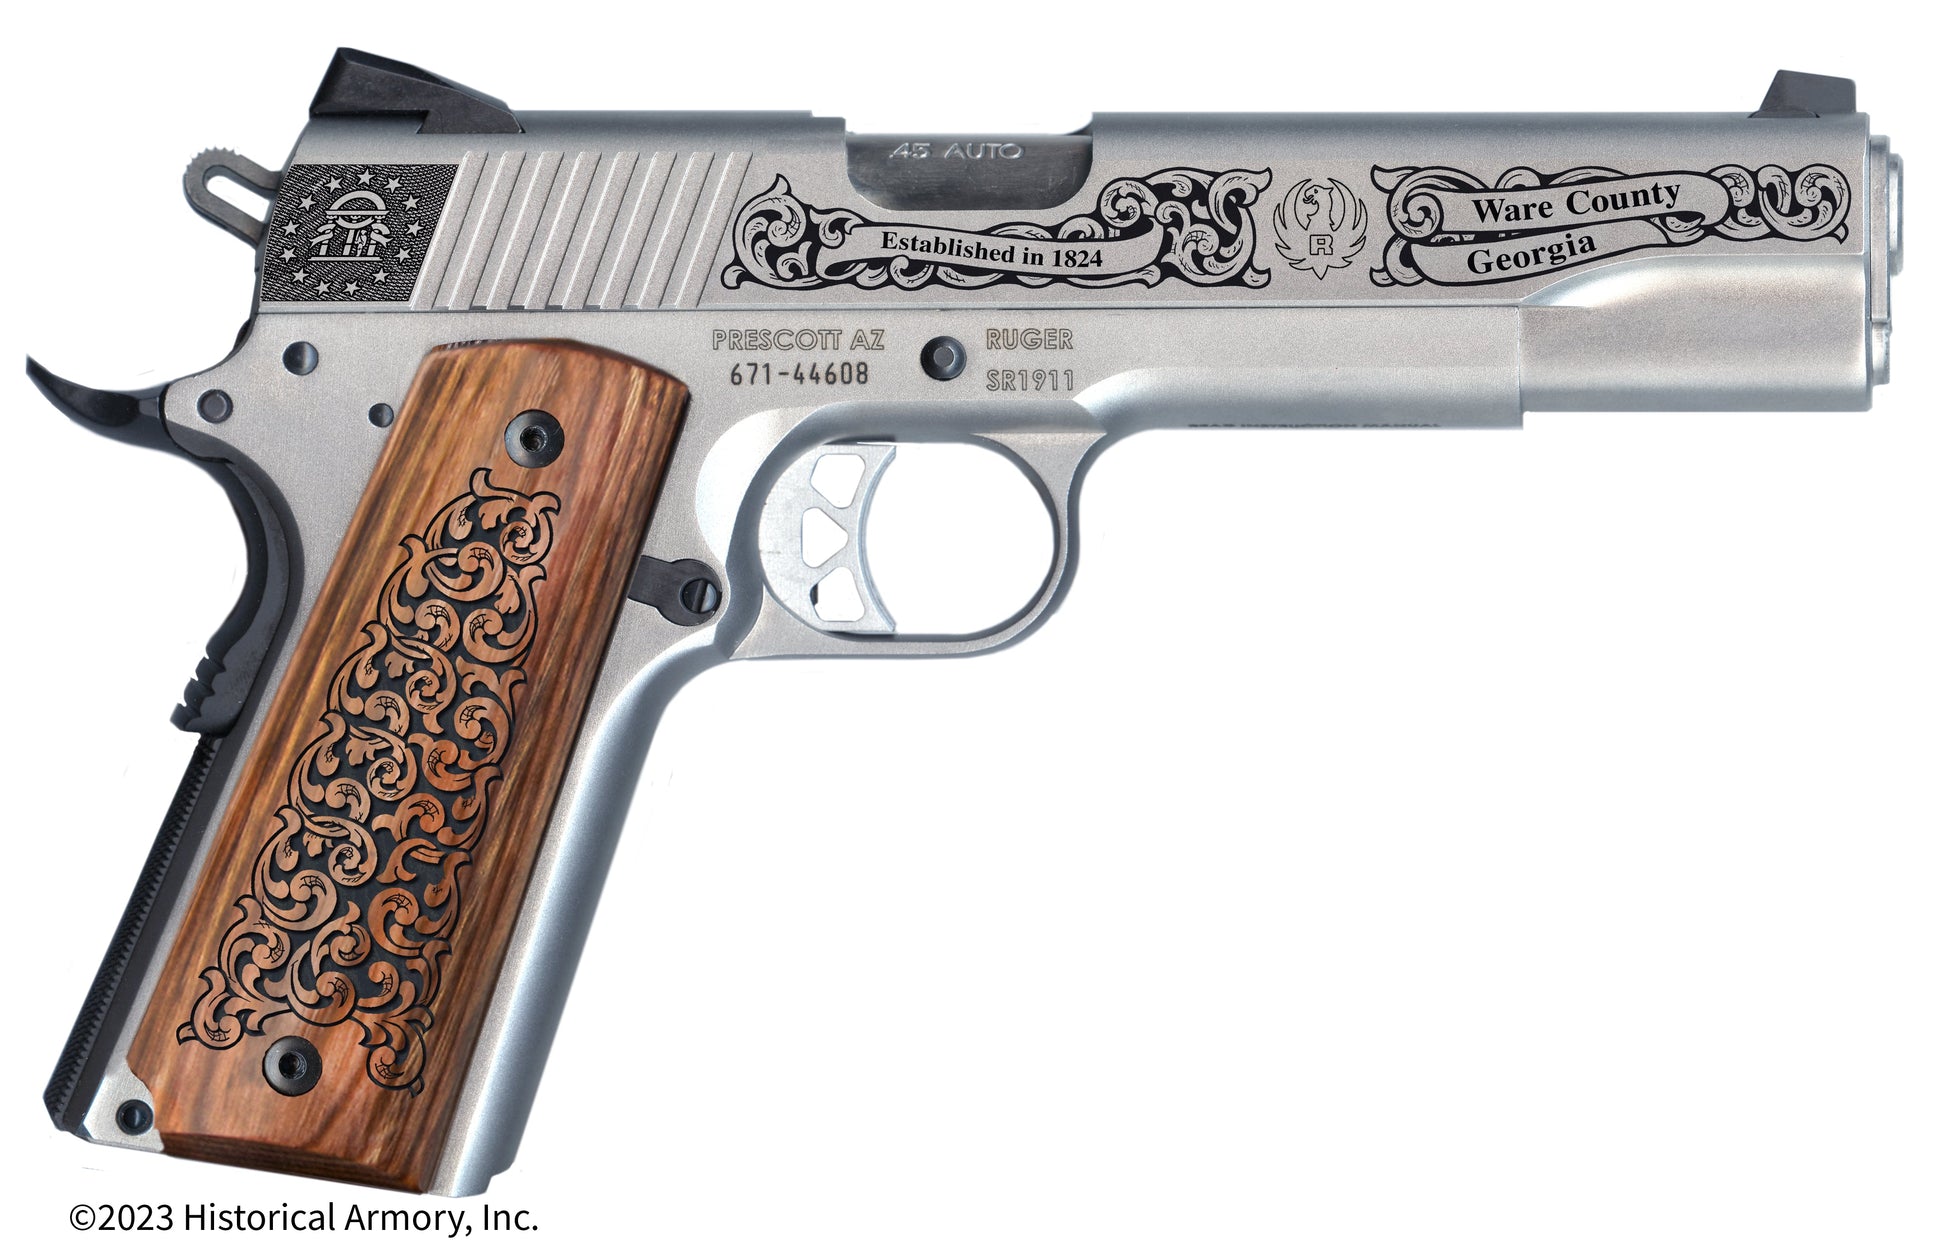 Ware County Georgia Engraved .45 Auto Ruger 1911